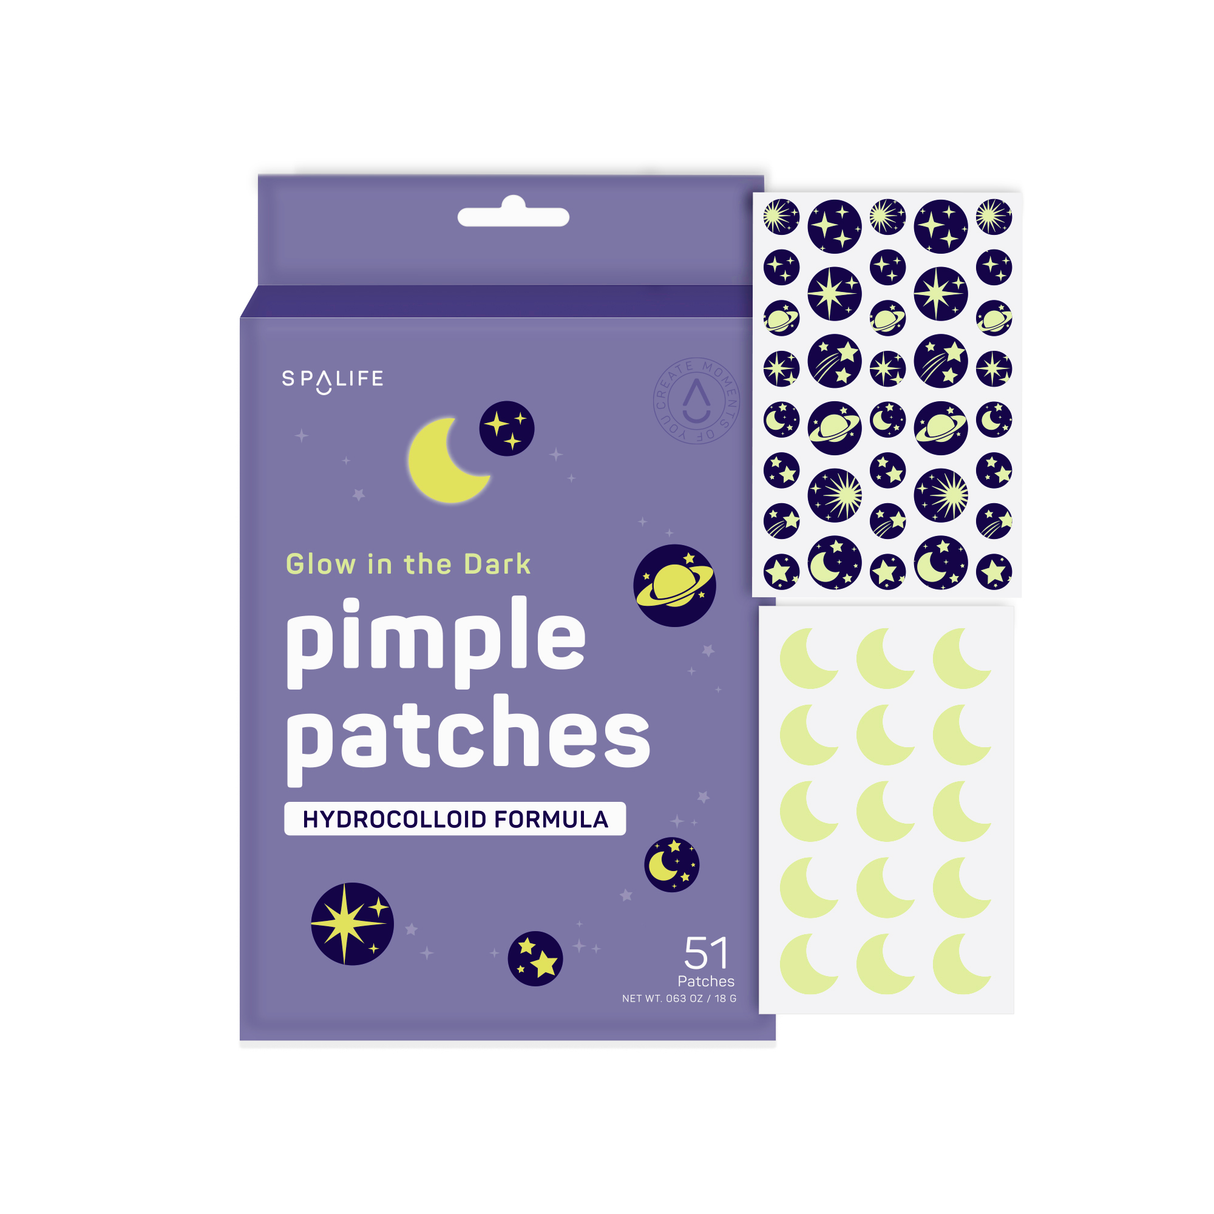 My Spa Life - Glow in the Dark Pimple Patches Hydrocolloid Formula